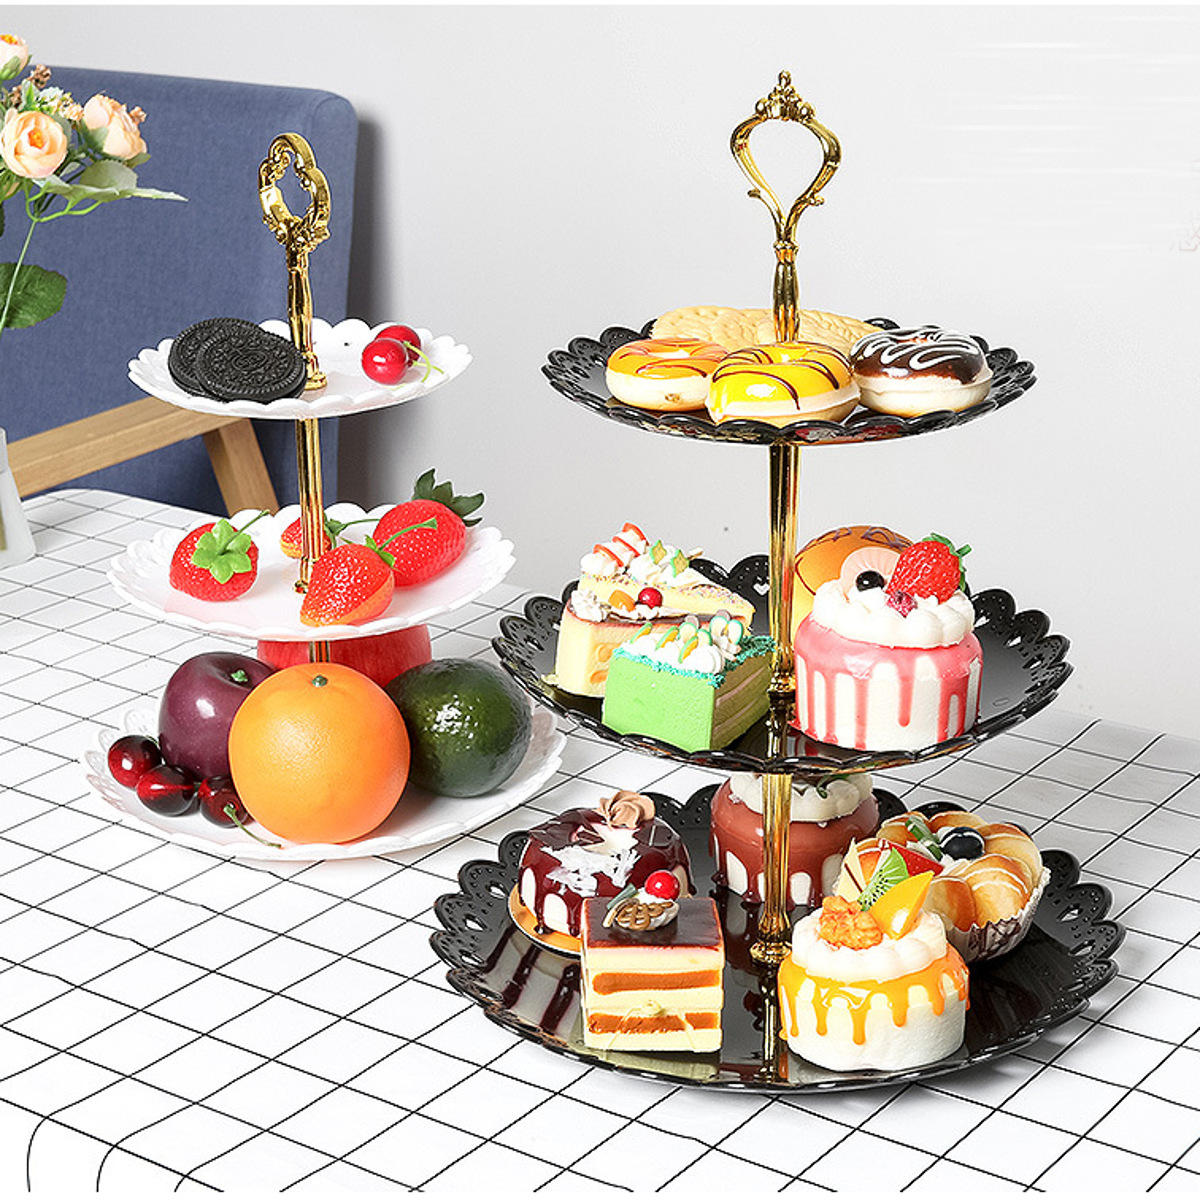 Dessert Stand Cake Fruit Cupcake Plate Holder Round Rack Cup Wedding Party Decor